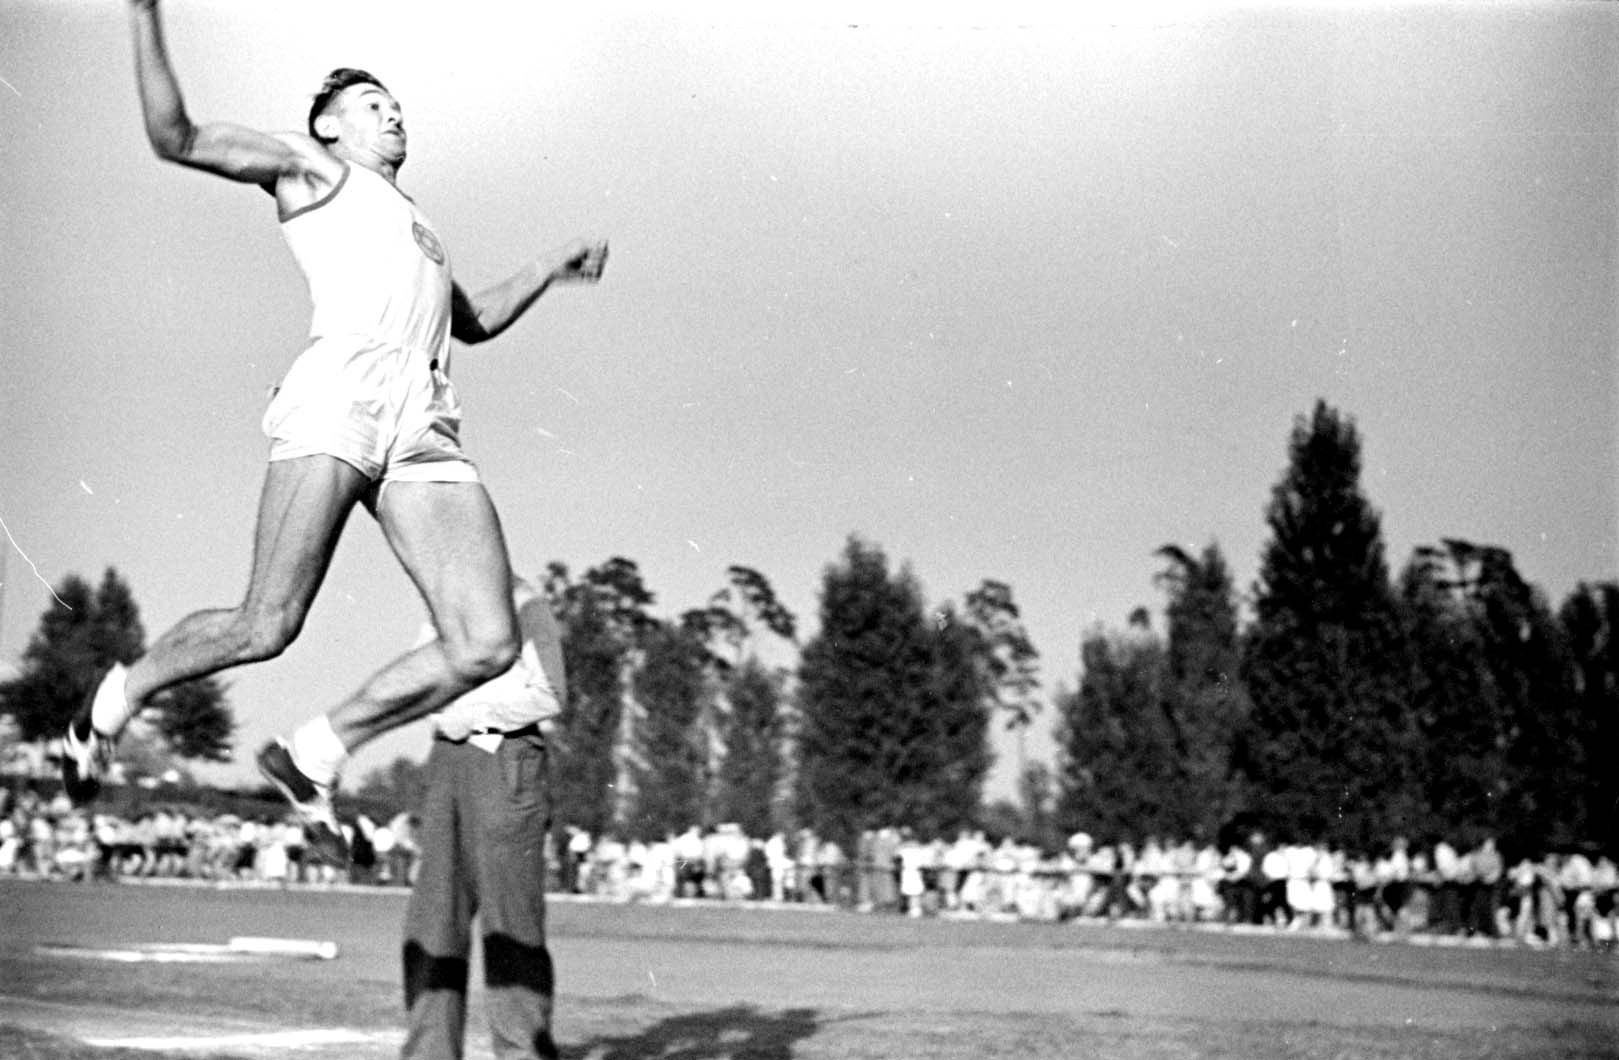 Germany, August 1937, A long jump event at a Maccabi track and field competition